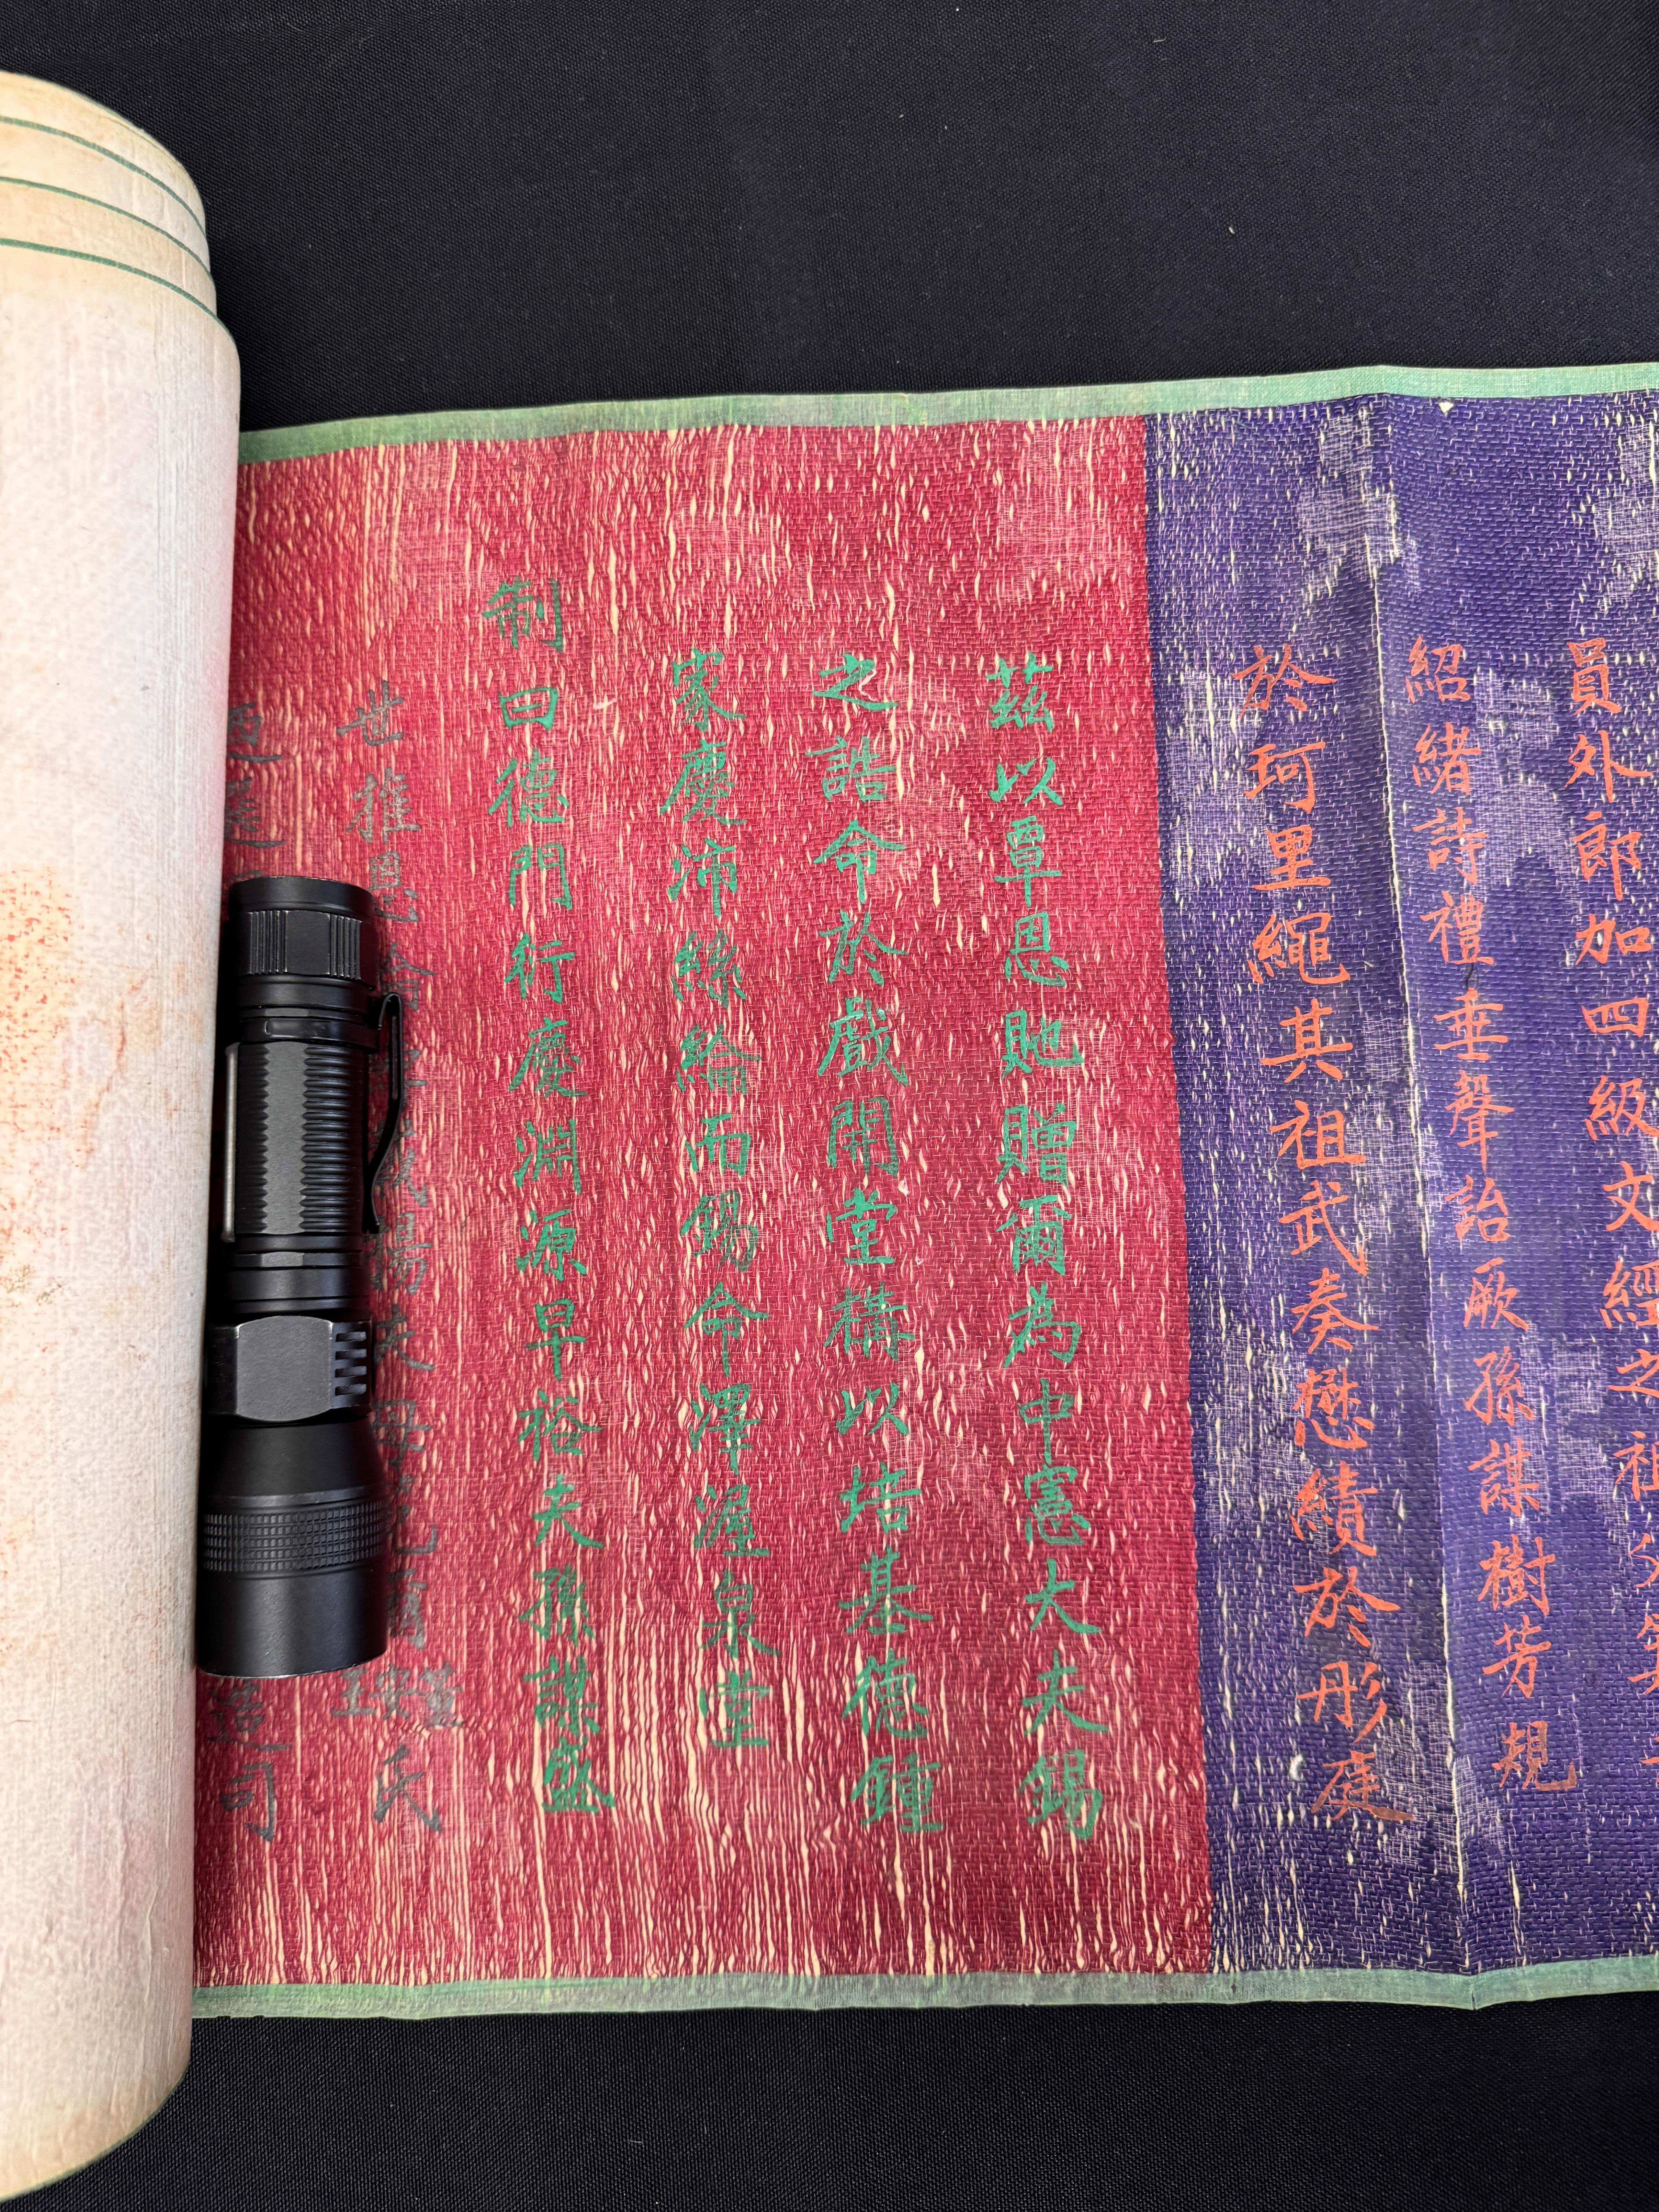 A CHINESE IMPERIAL EDICT HANDSCROLL 清光緒 1894年 世襲誥命文書 - Image 11 of 30